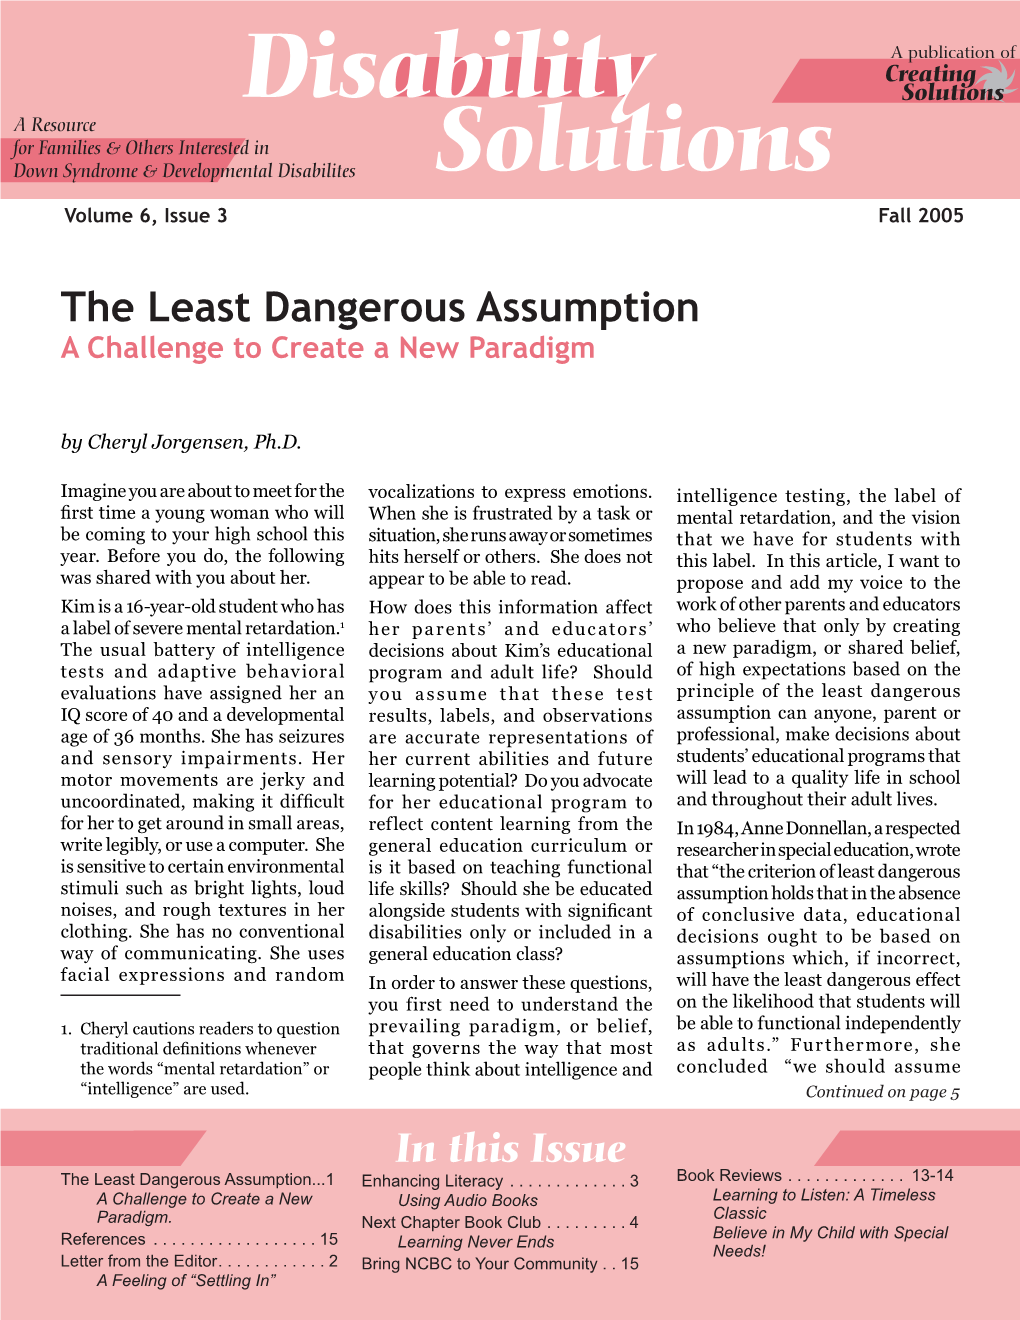 The Least Dangerous Assumption a Challenge to Create a New Paradigm